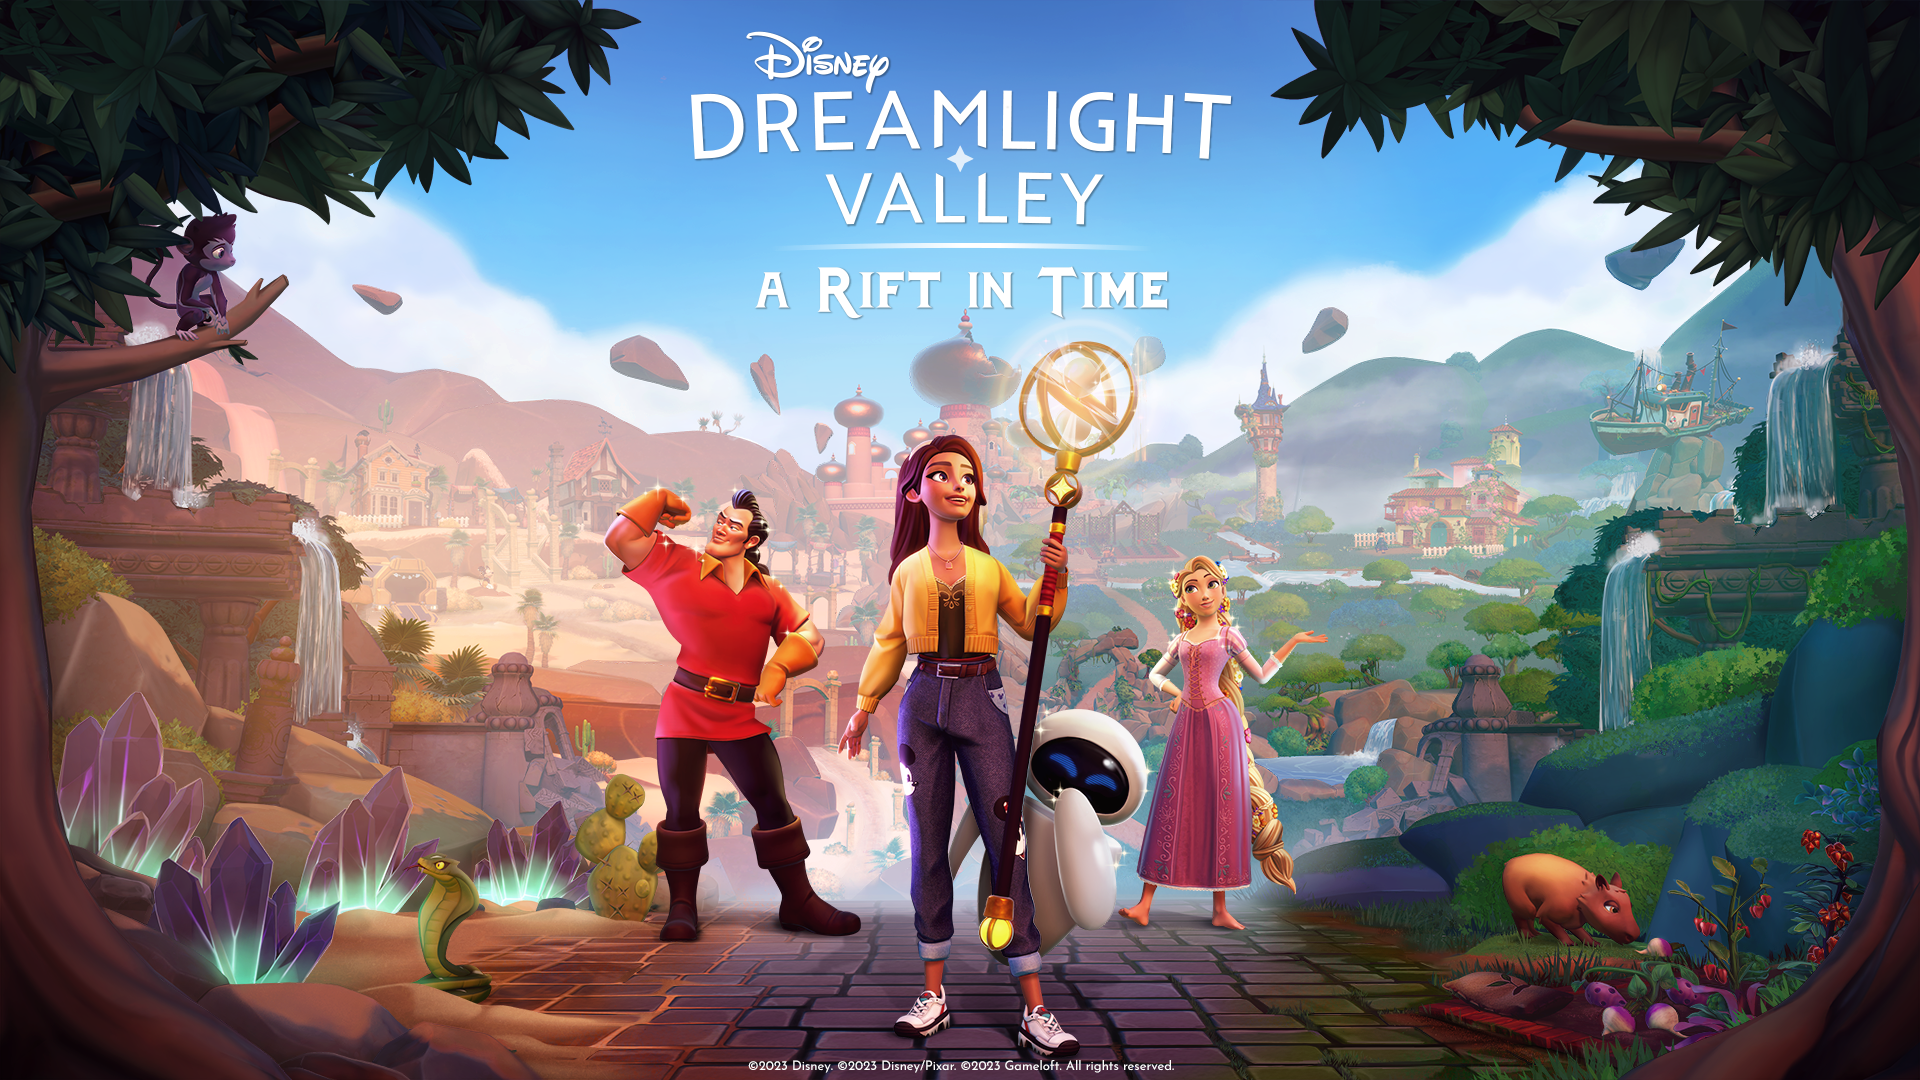 Disney Dreamlight Valley leaving Early Access in December, will not be free-to-play